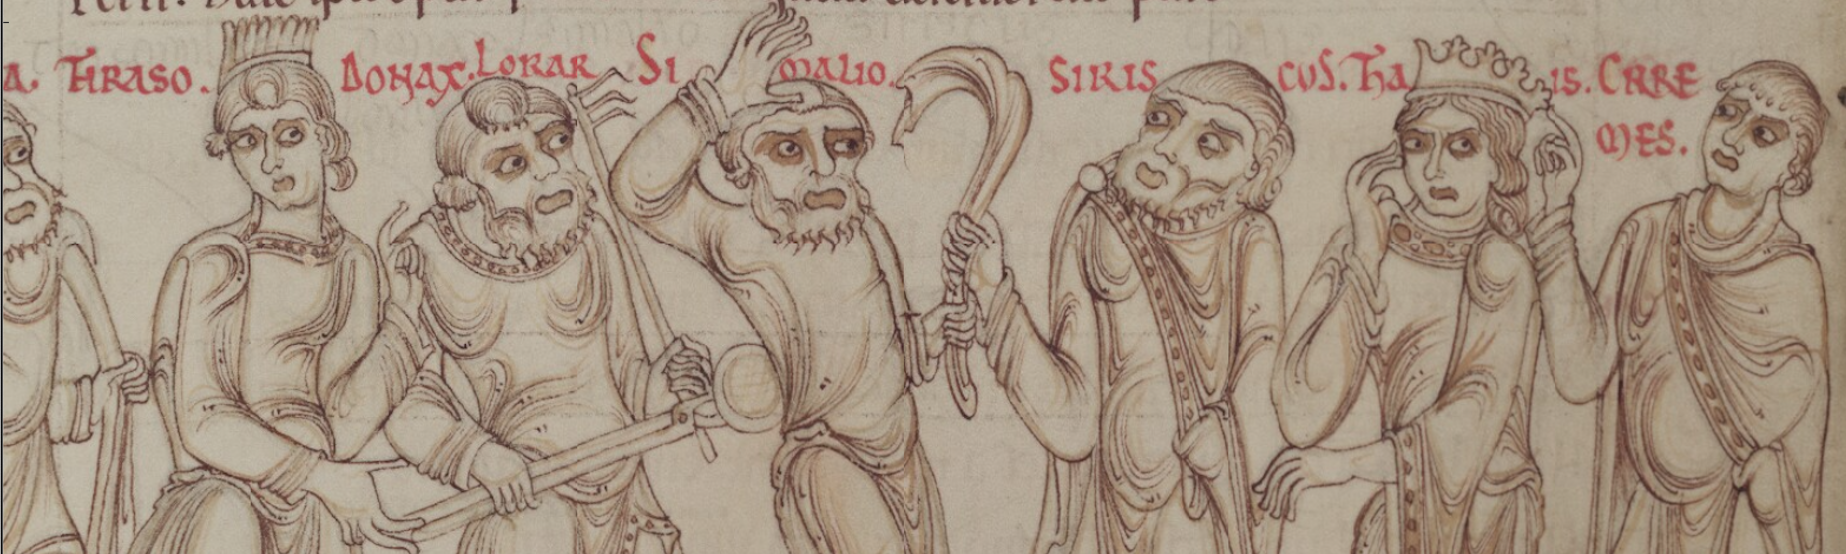 An illustration from a 12th century English manuscript of Terence's Eunuchus: the image depicts the soldier Thraso and his henchmen ready to besiege a house.